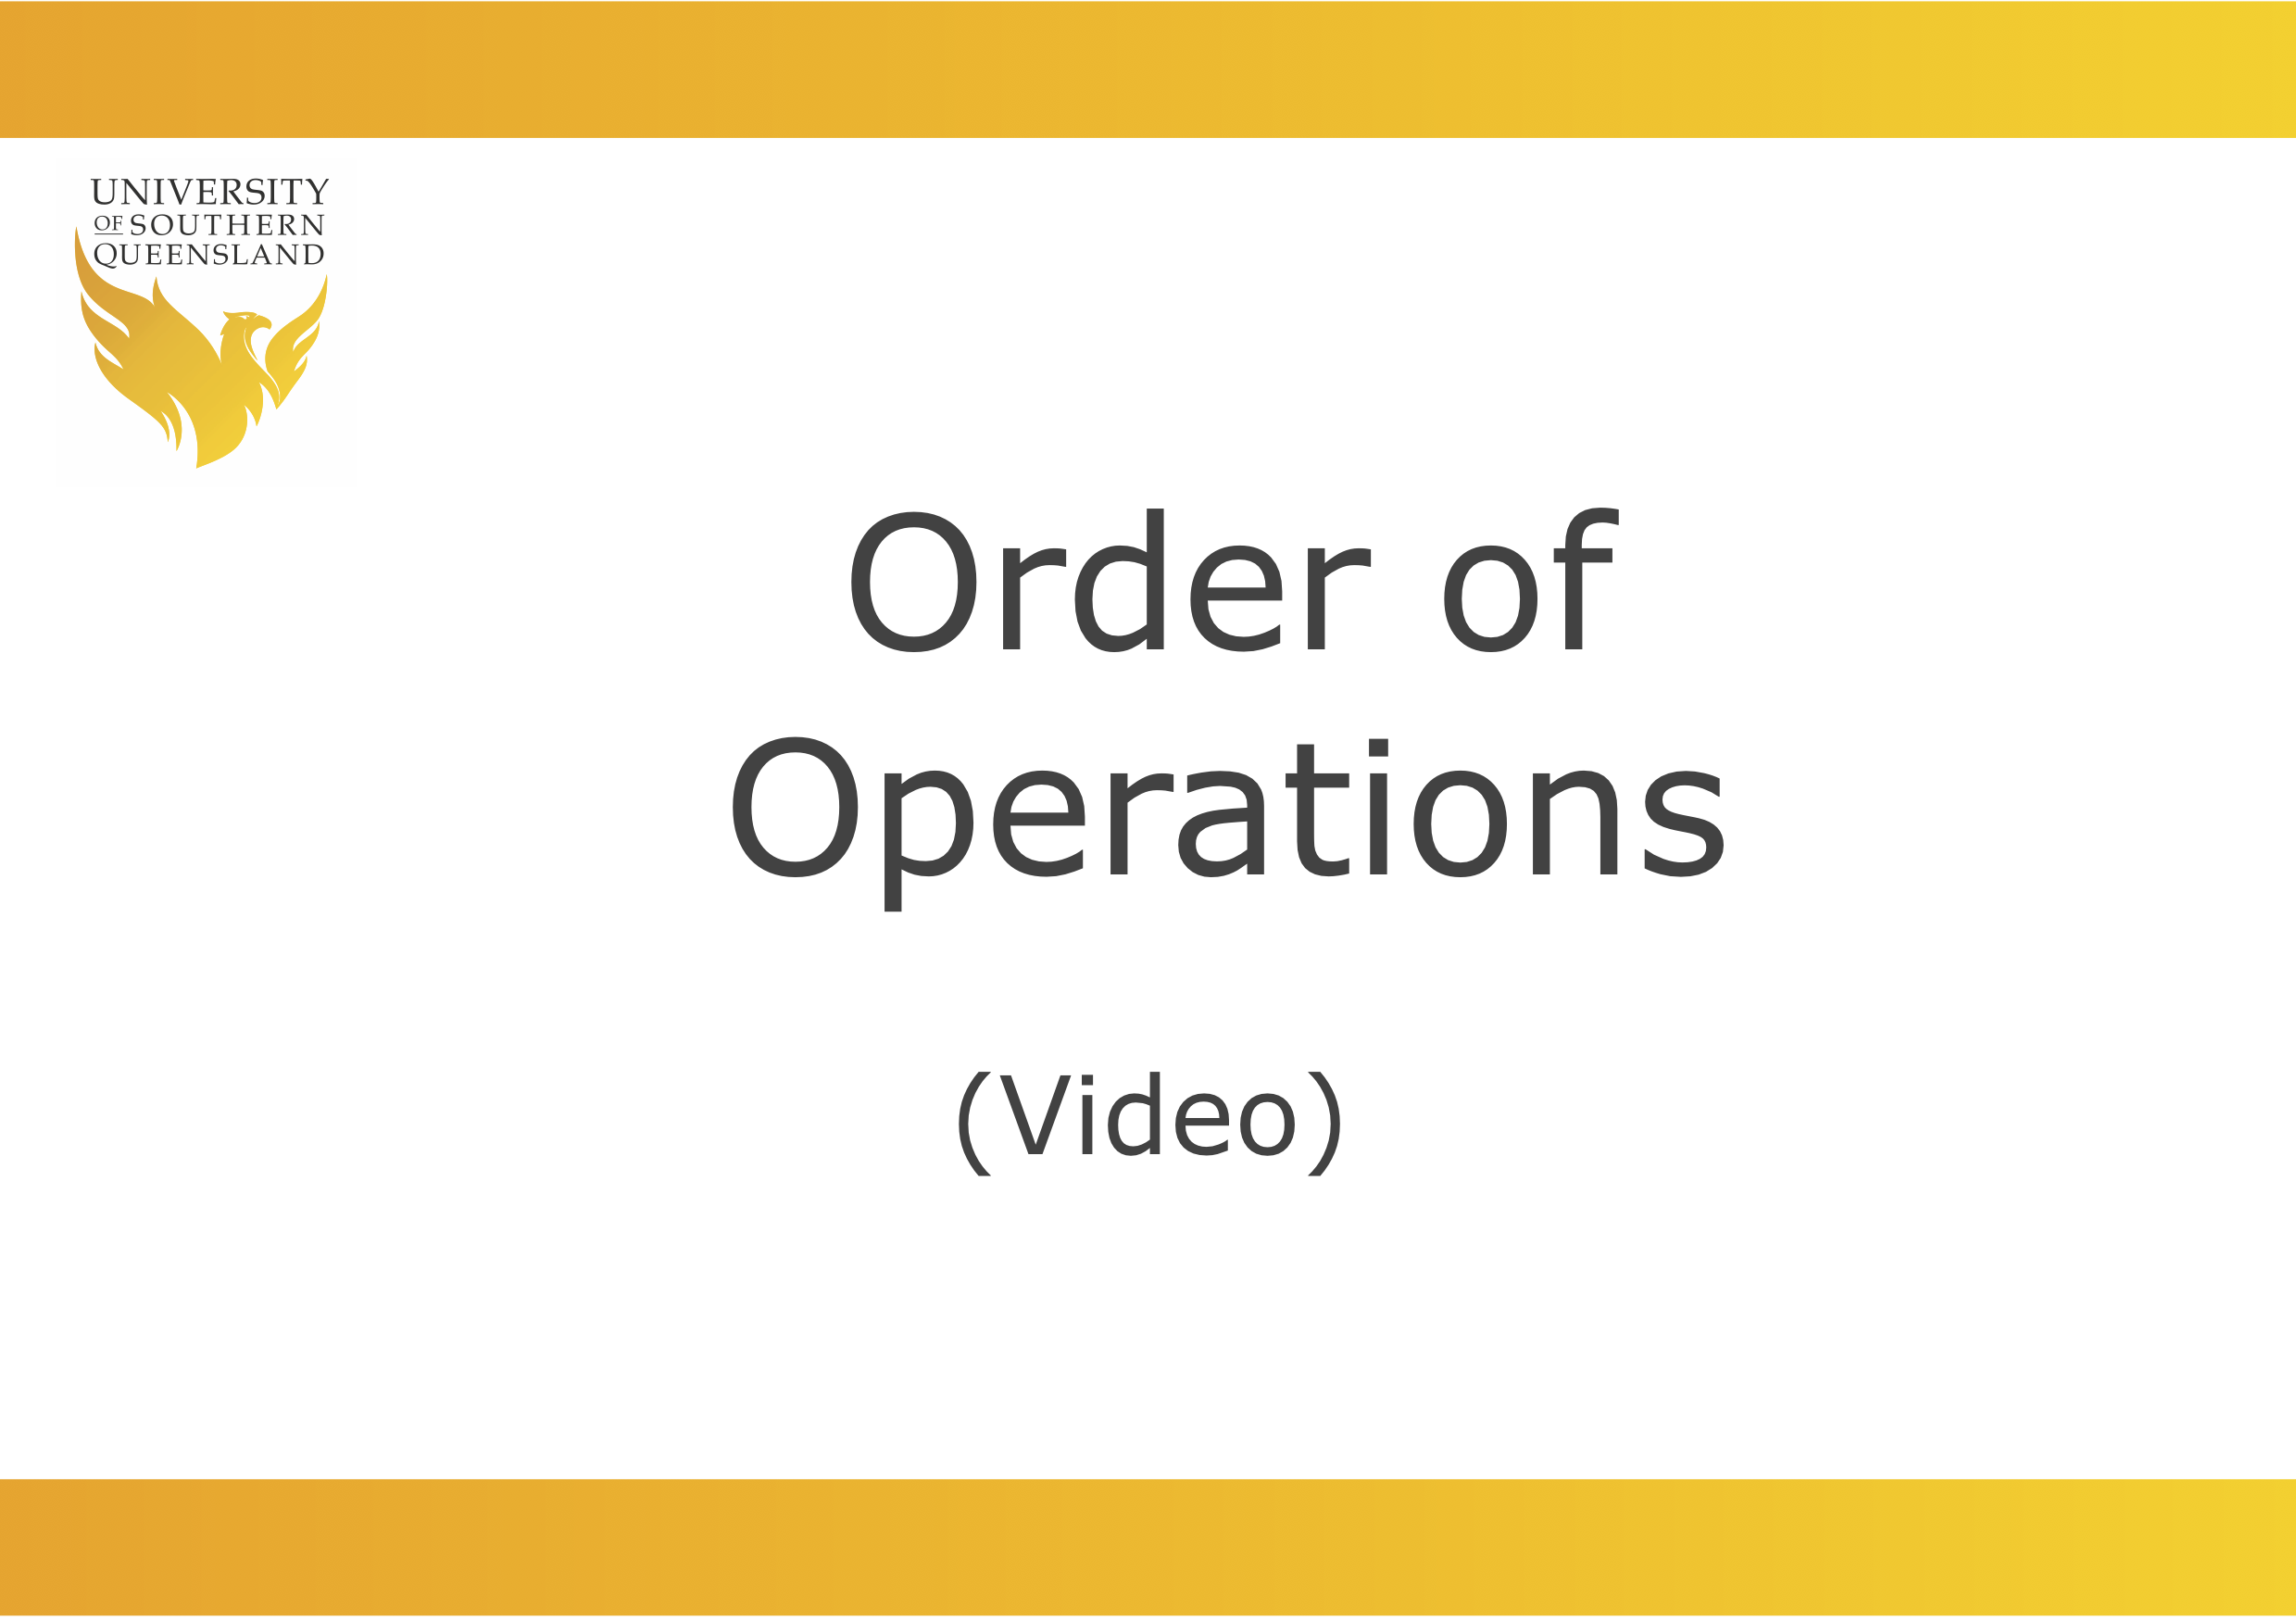 Order of Operations video